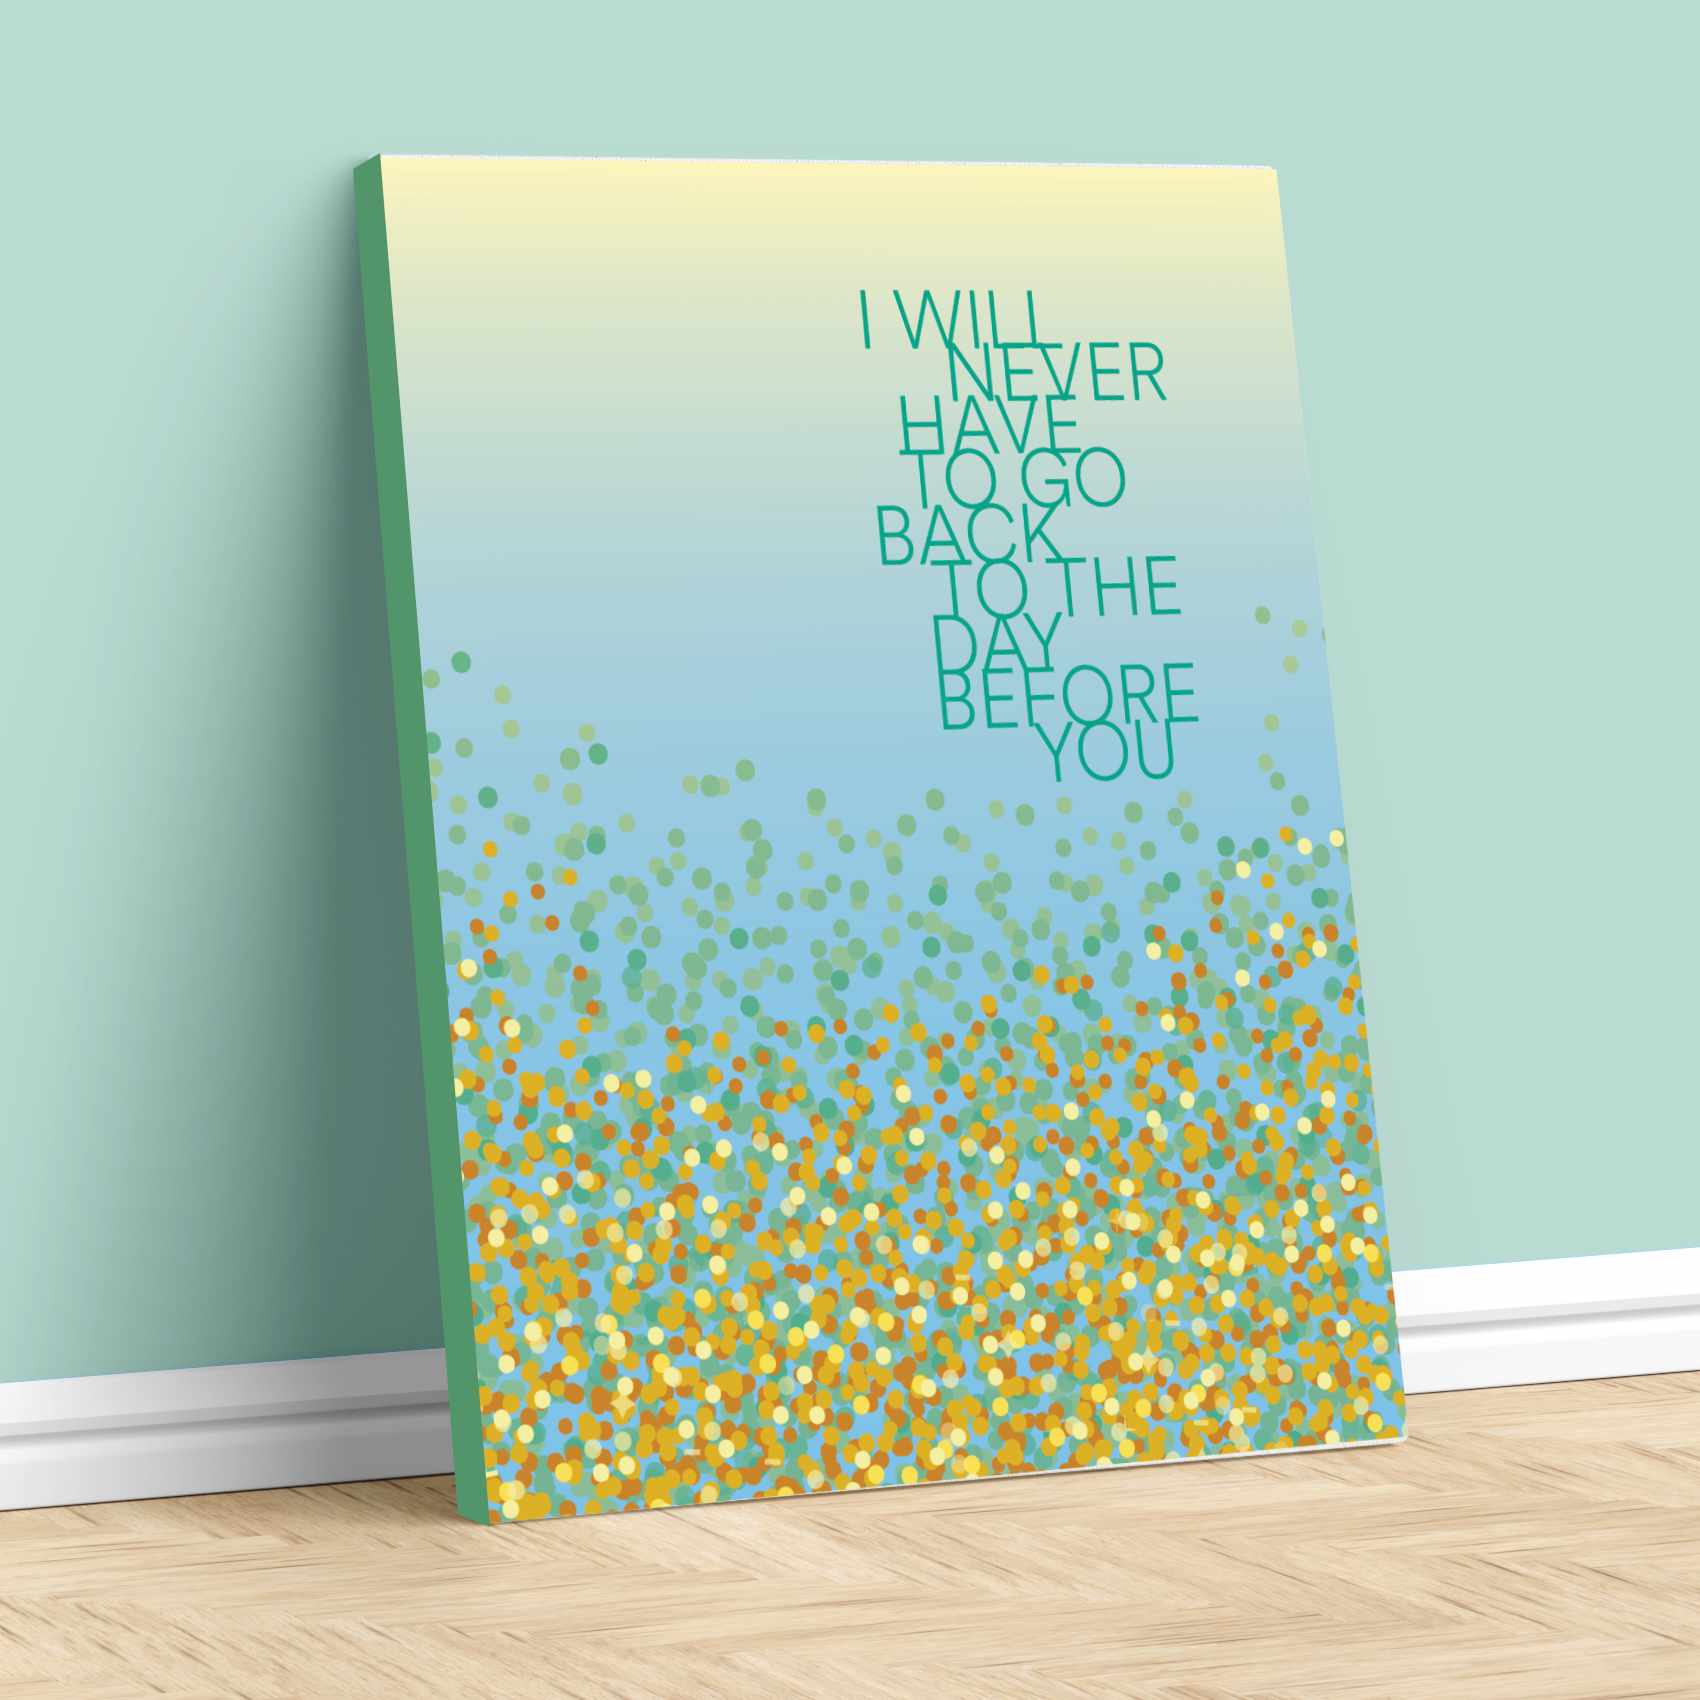 The Day Before You by Matthew West - Song Lyric Art Print Song Lyrics Art Song Lyrics Art 11x14 Canvas Wrap 